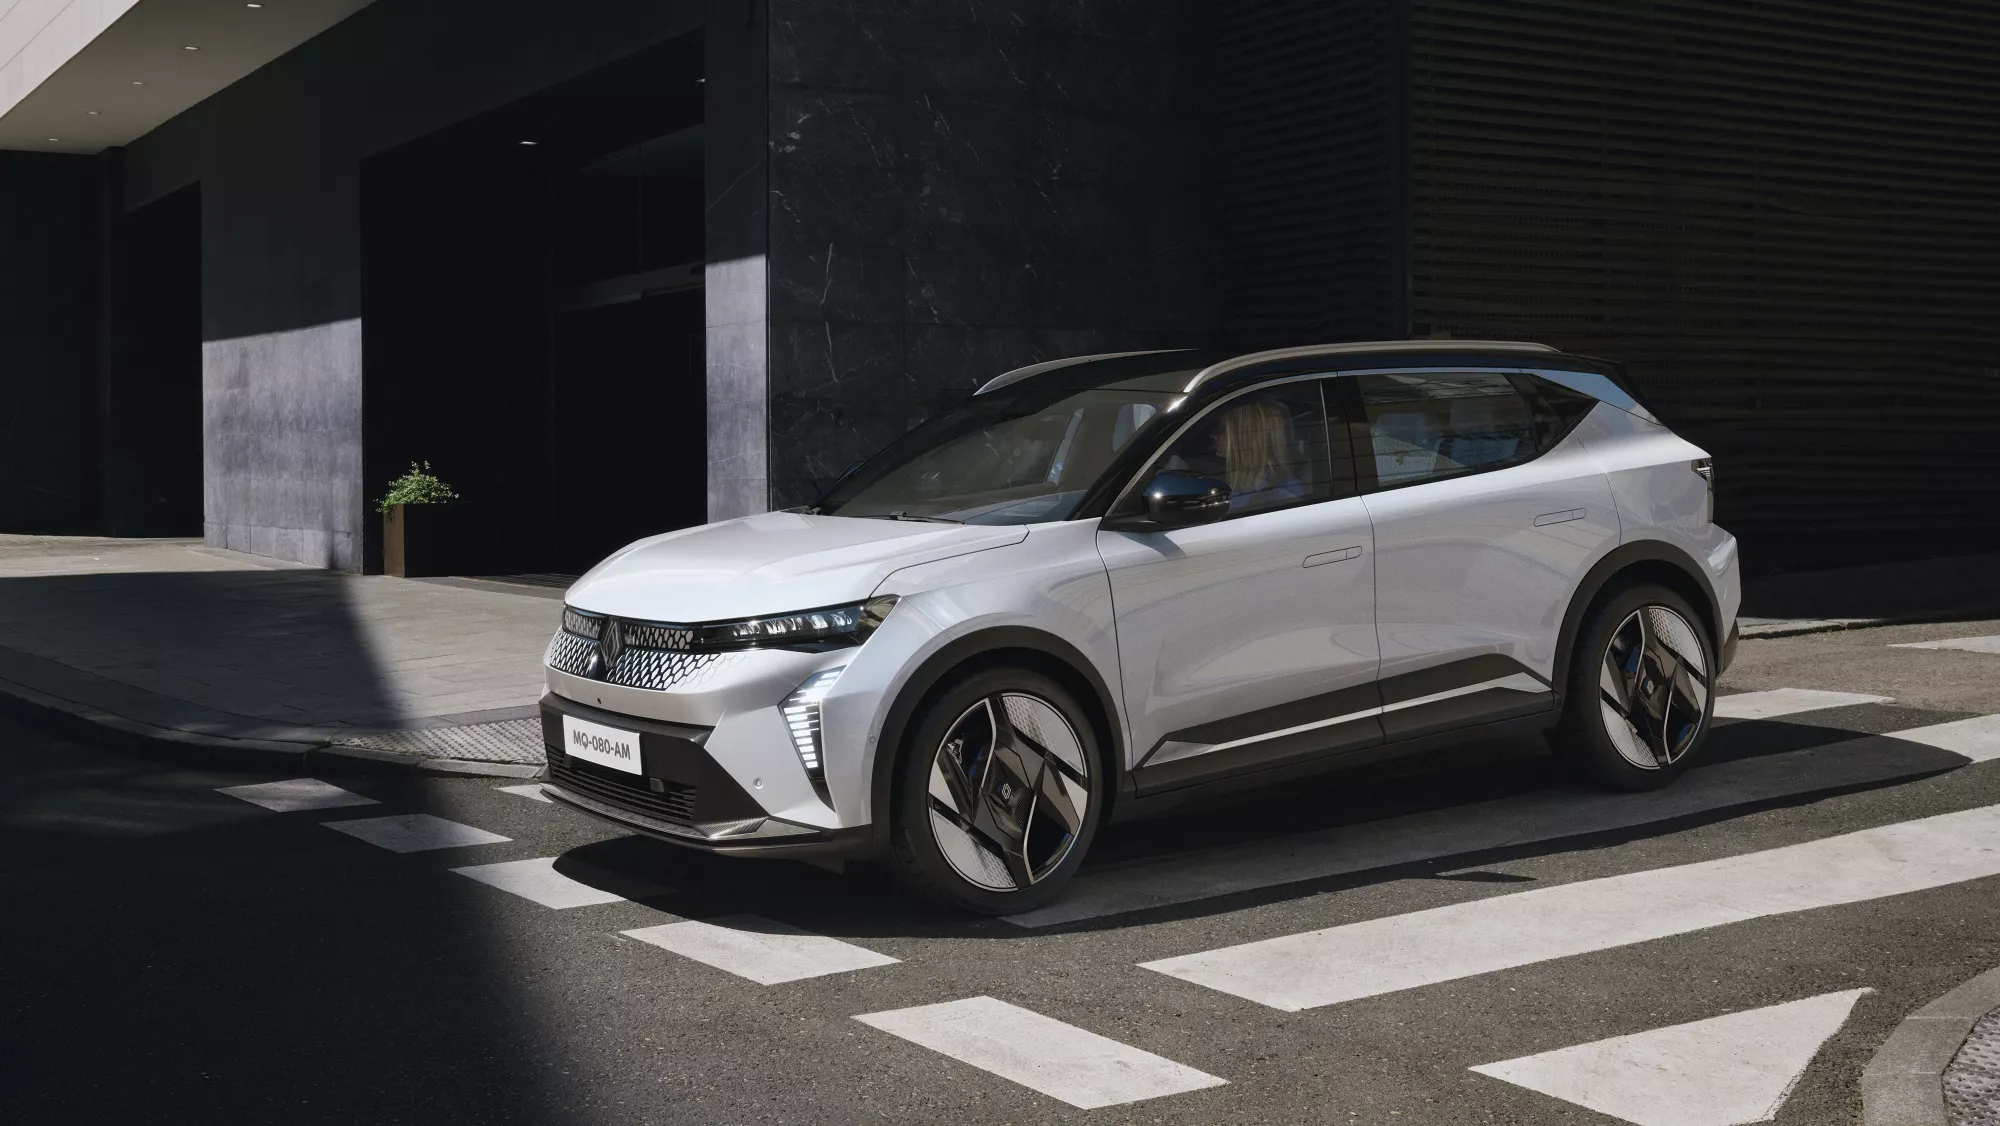 The All-new Renault Scenic E-Tech electric: the first more sustainably  designed all-electric family vehicle - Site media global de Renault